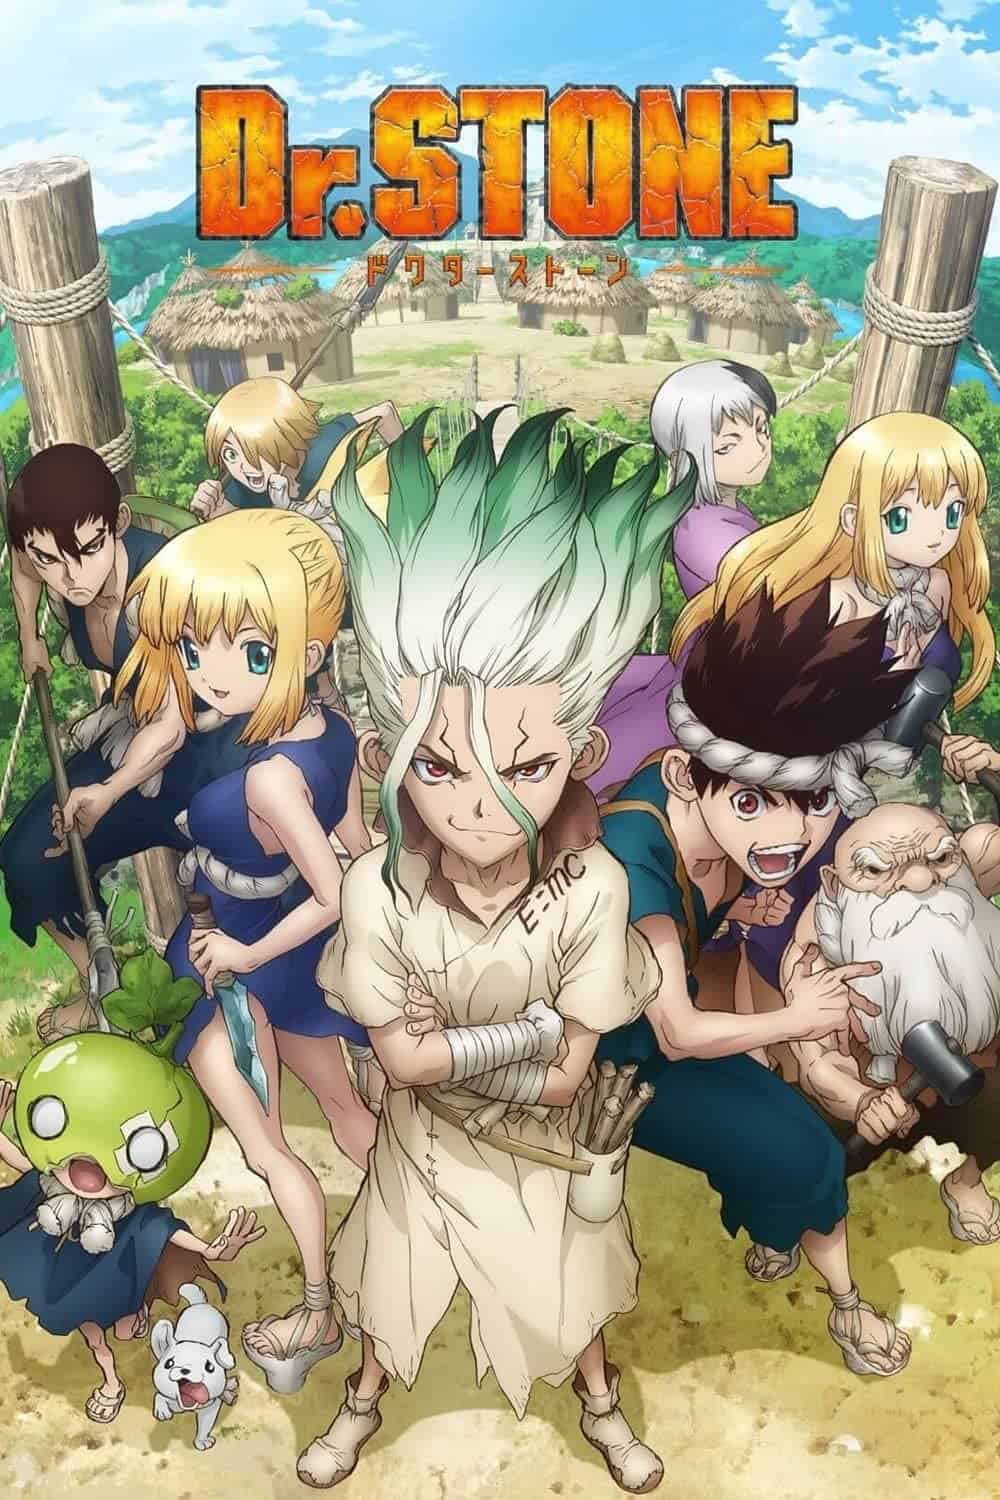 Dr. Stone hd poster